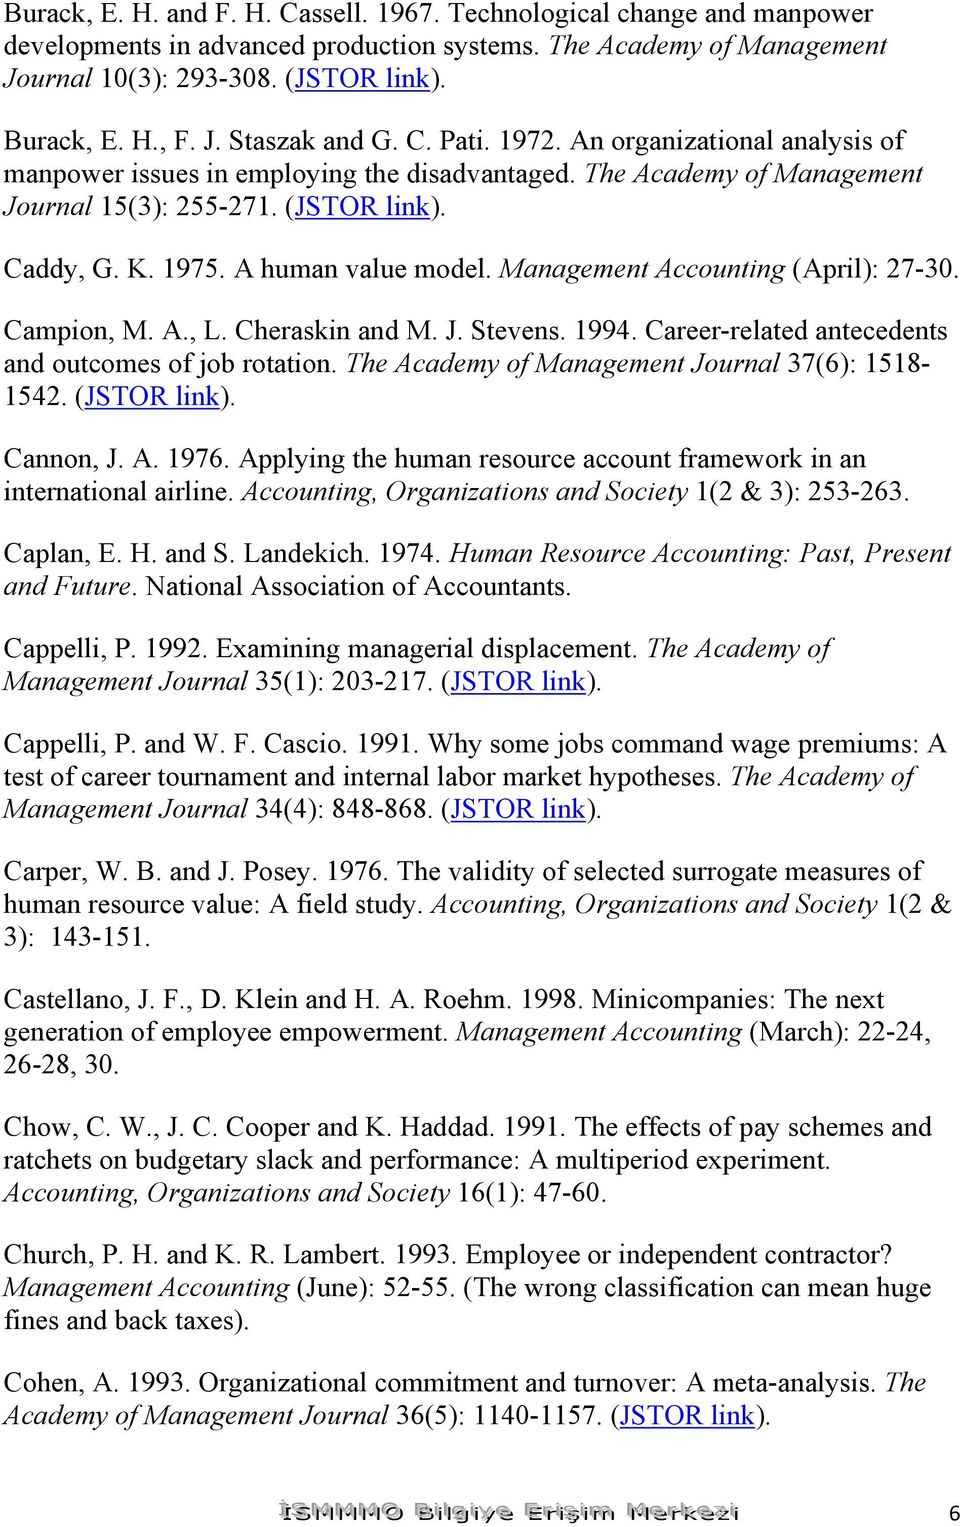 Management Accounting (April): 27-30. Campion, M. A., L. Cheraskin and M. J. Stevens. 1994. Career-related antecedents and outcomes of job rotation. The Academy of Management Journal 37(6): 1518-1542.